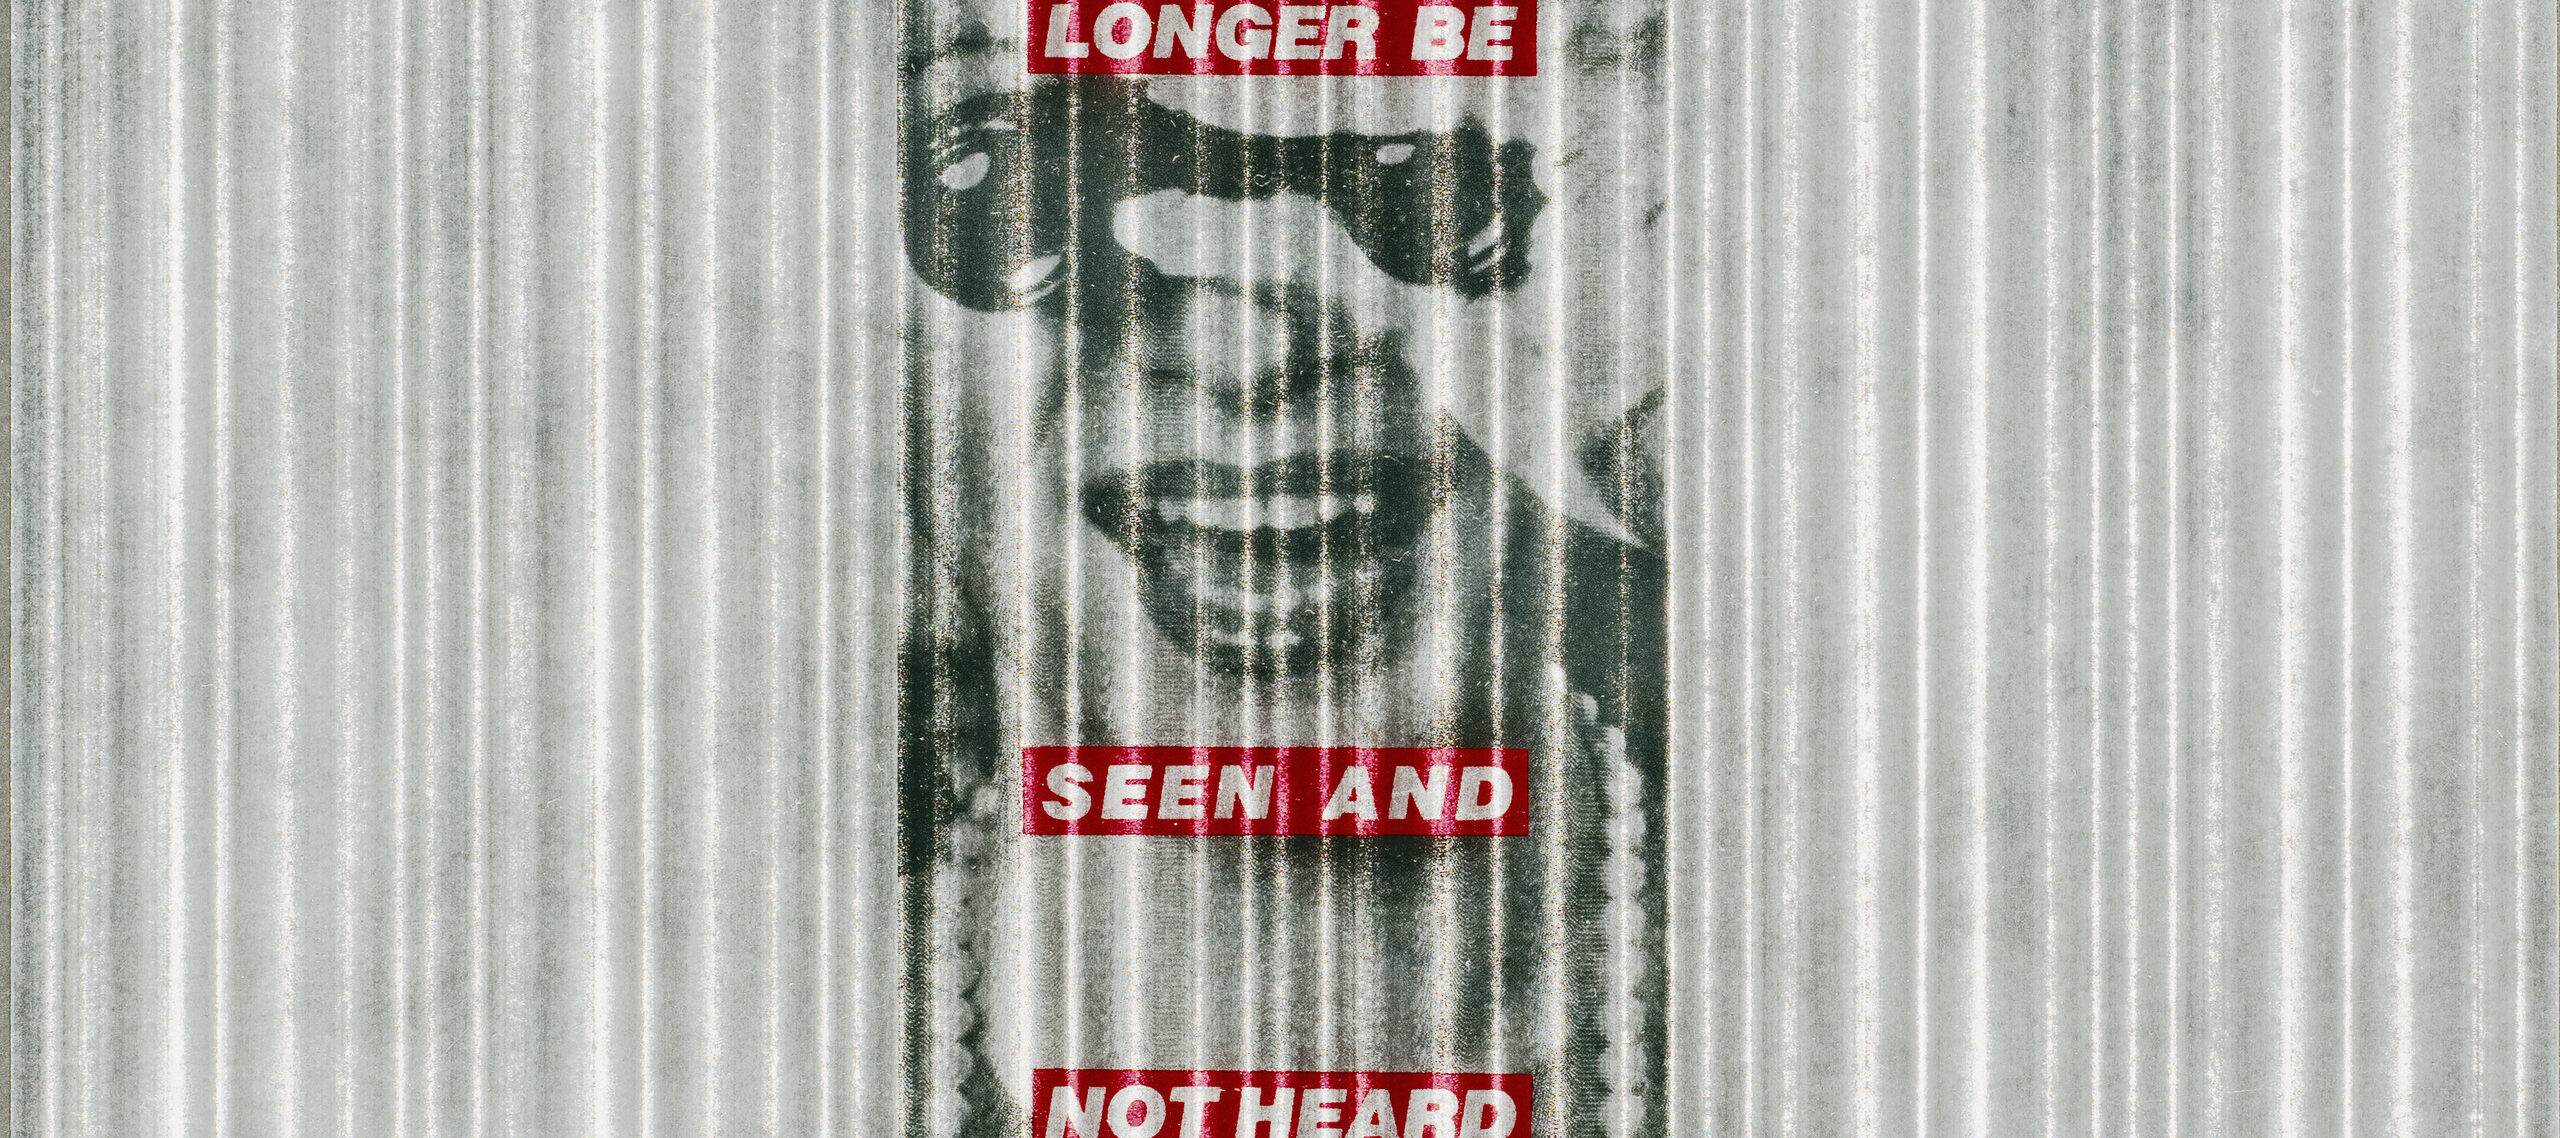 Black and white image of a light skinned woman in a pearl necklace and holding binoculars to her eyes, on a gray and white vertically striped background. Superimposed over the image are four red horizontal bands with 'We will no longer be seen and not heard' in white block letters.